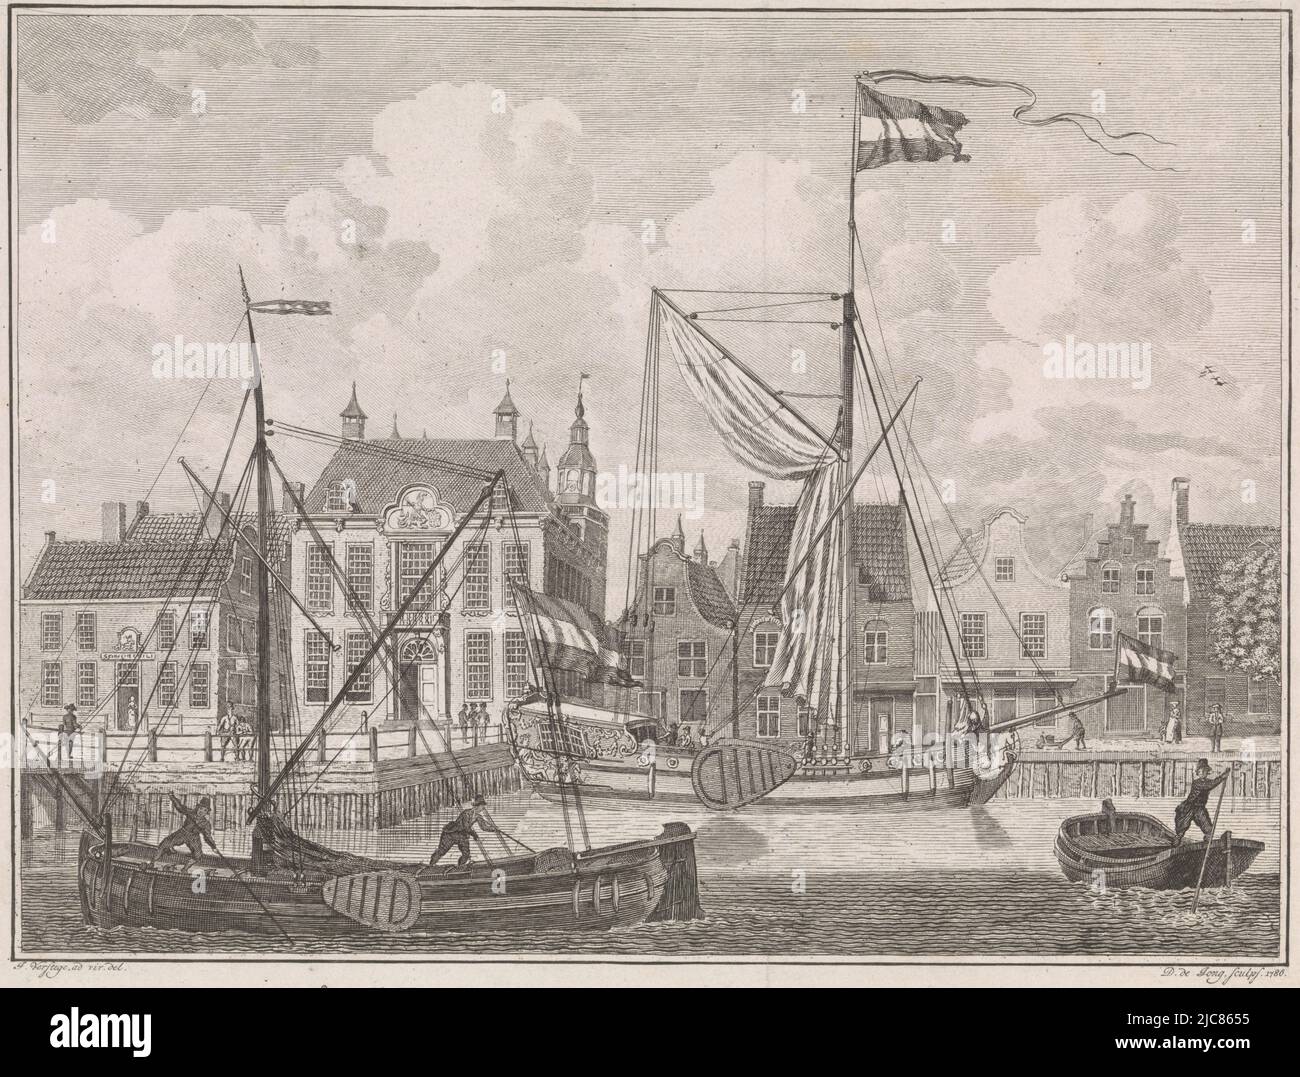 View of the harbor and town hall at Harlingen. The Frisian state yacht is moored near the town hall. In the foreground are a tjalk and a praam. In the margin a caption in Dutch, Gezicht op stadshuis te Harlingen 't Stadshuis te Harlingen , print maker: Dirk de Jong, (mentioned on object), intermediary draughtsman: G. Verstege, (mentioned on object), Noord-Nederland, 1786, paper, etching, engraving, h 198 mm × w 251 mm Stock Photo